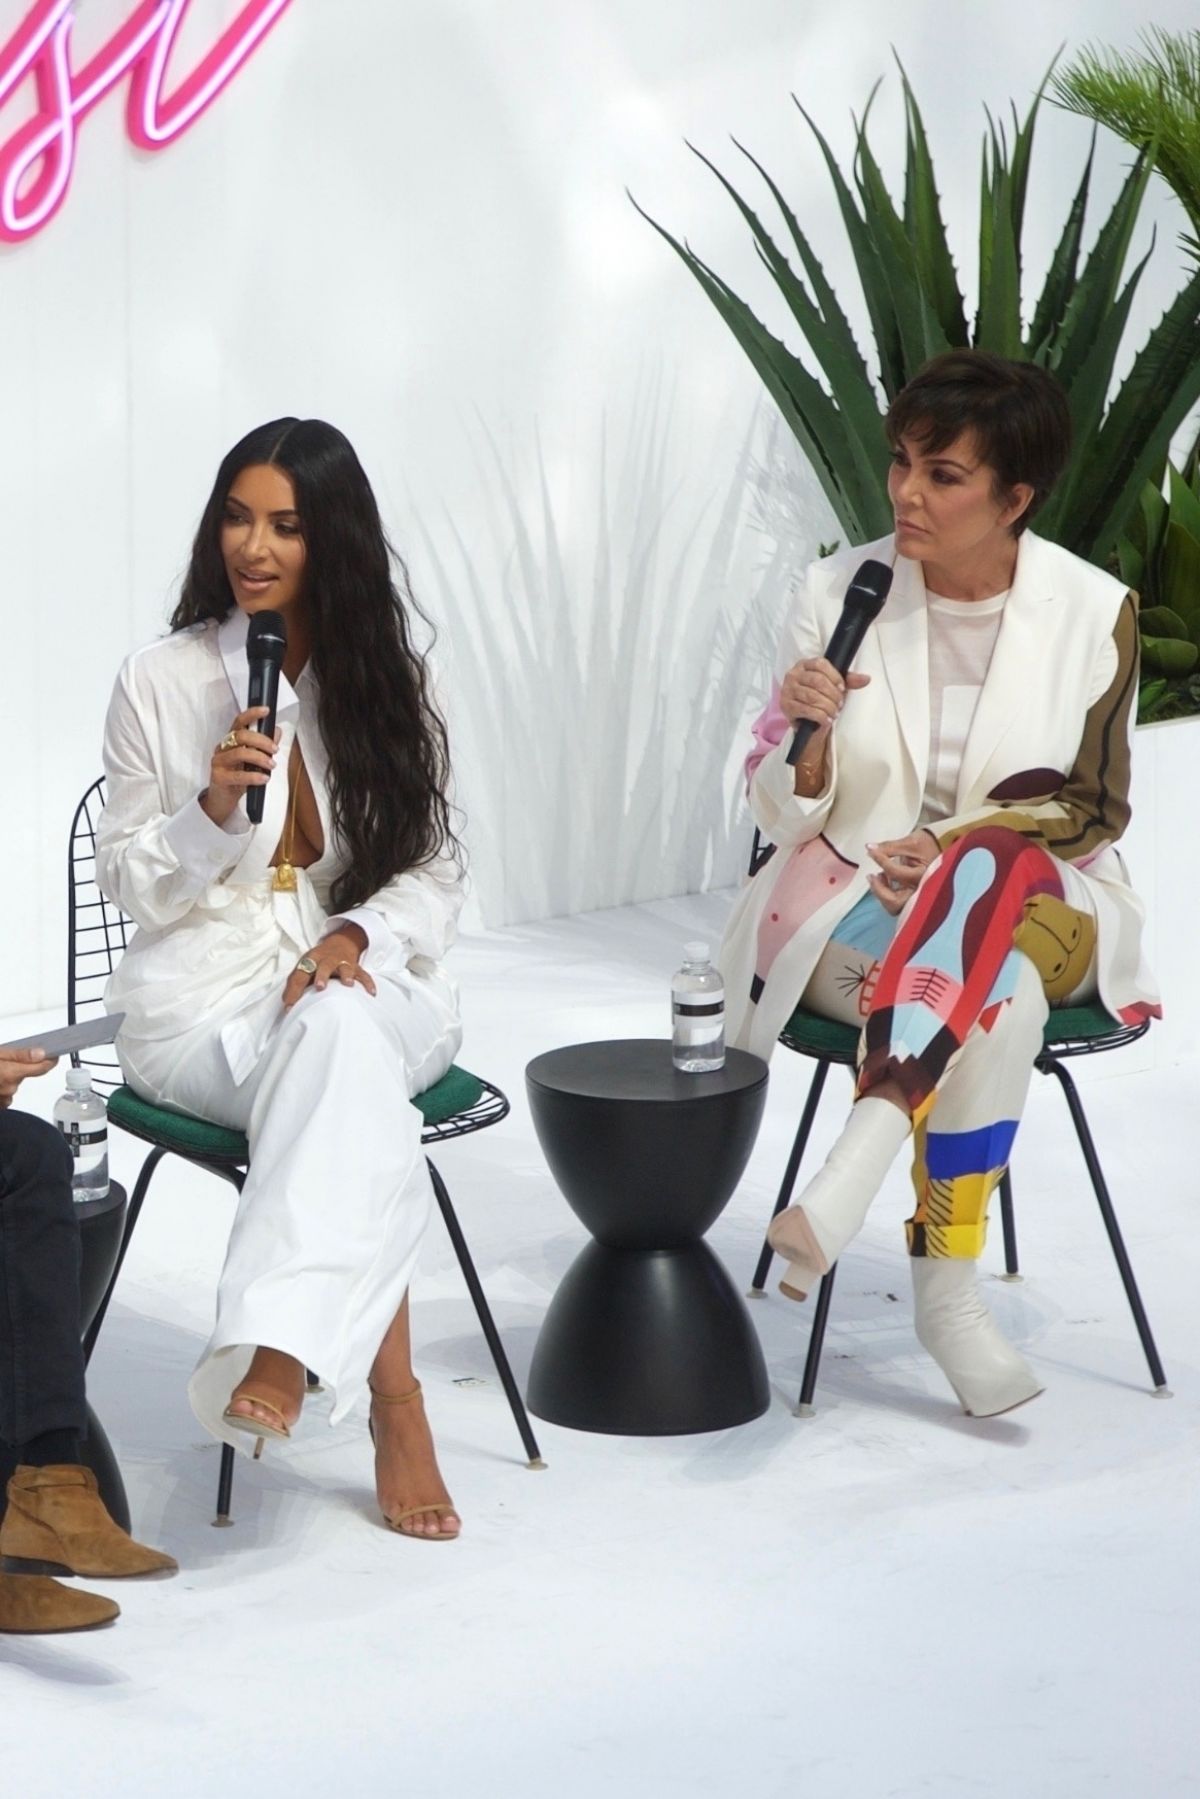 kim-kardashian-and-kris-jenner-at-interview-at-bof-west-in-beverly-hills-06-18-2018-10.jpg